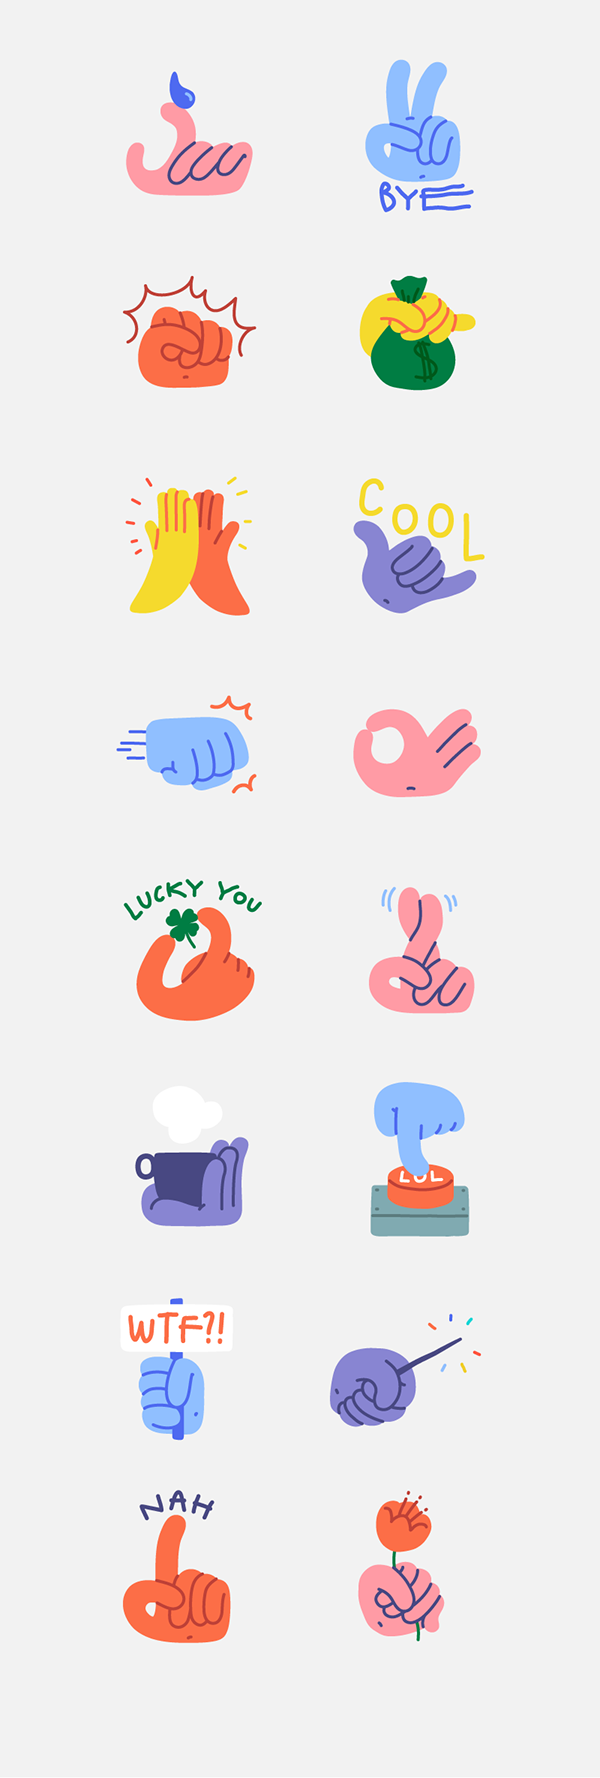 Handy Hands - Snapchat Stickers